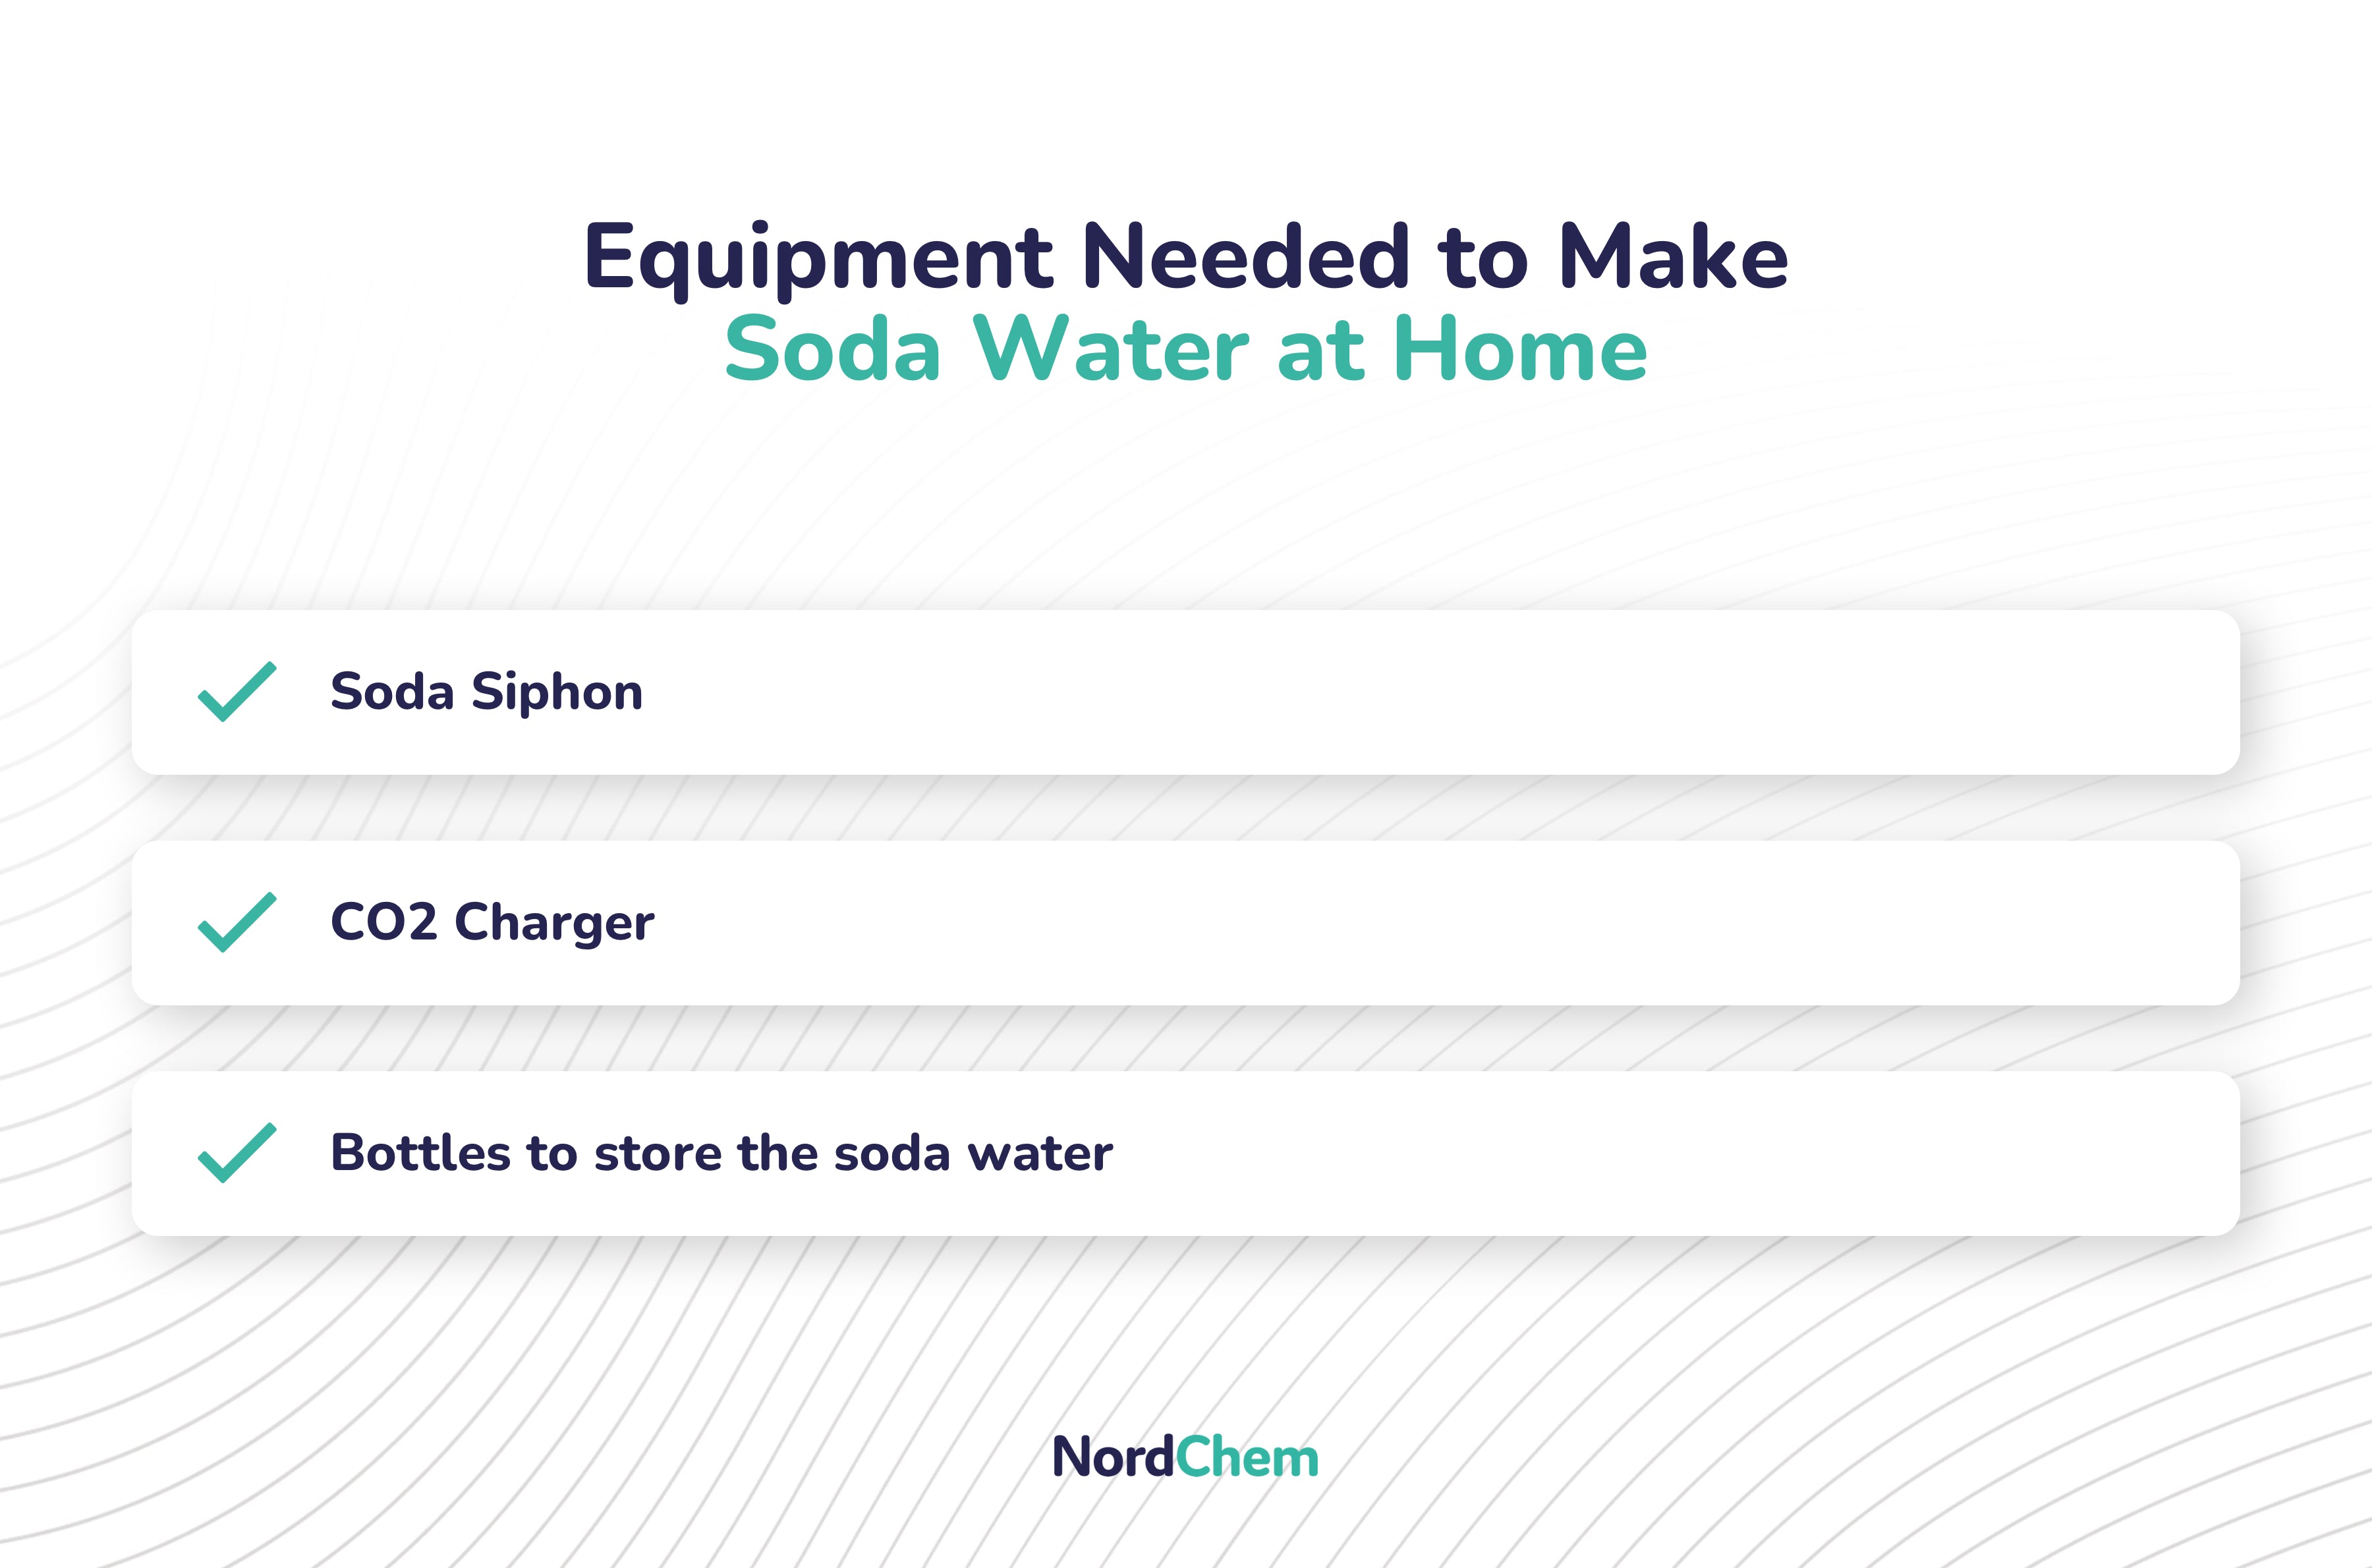 image detailing the equipment needed to make soda water